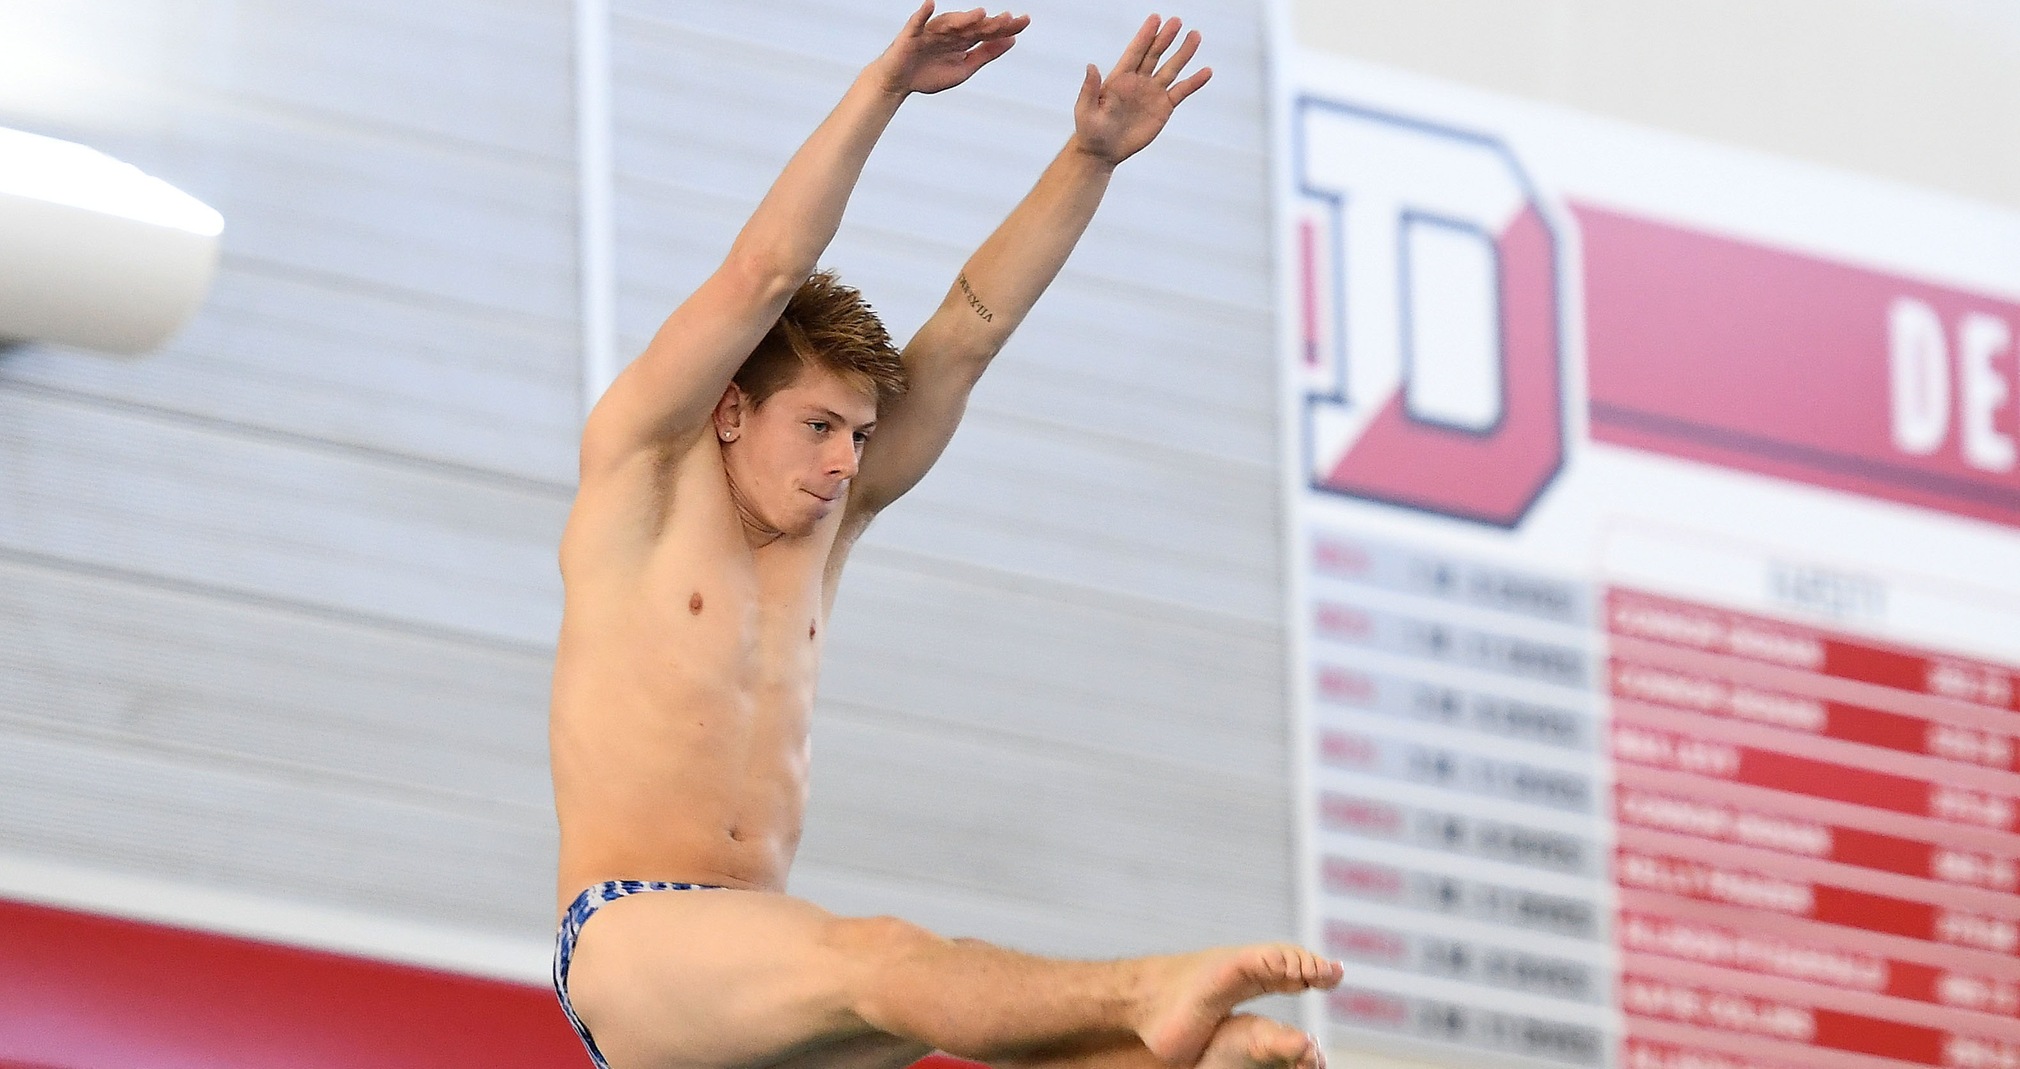 Matt Wilke finished third in the 3- and fifth in the 1-meter categories at the NCAA Division III Region 1 Championships.